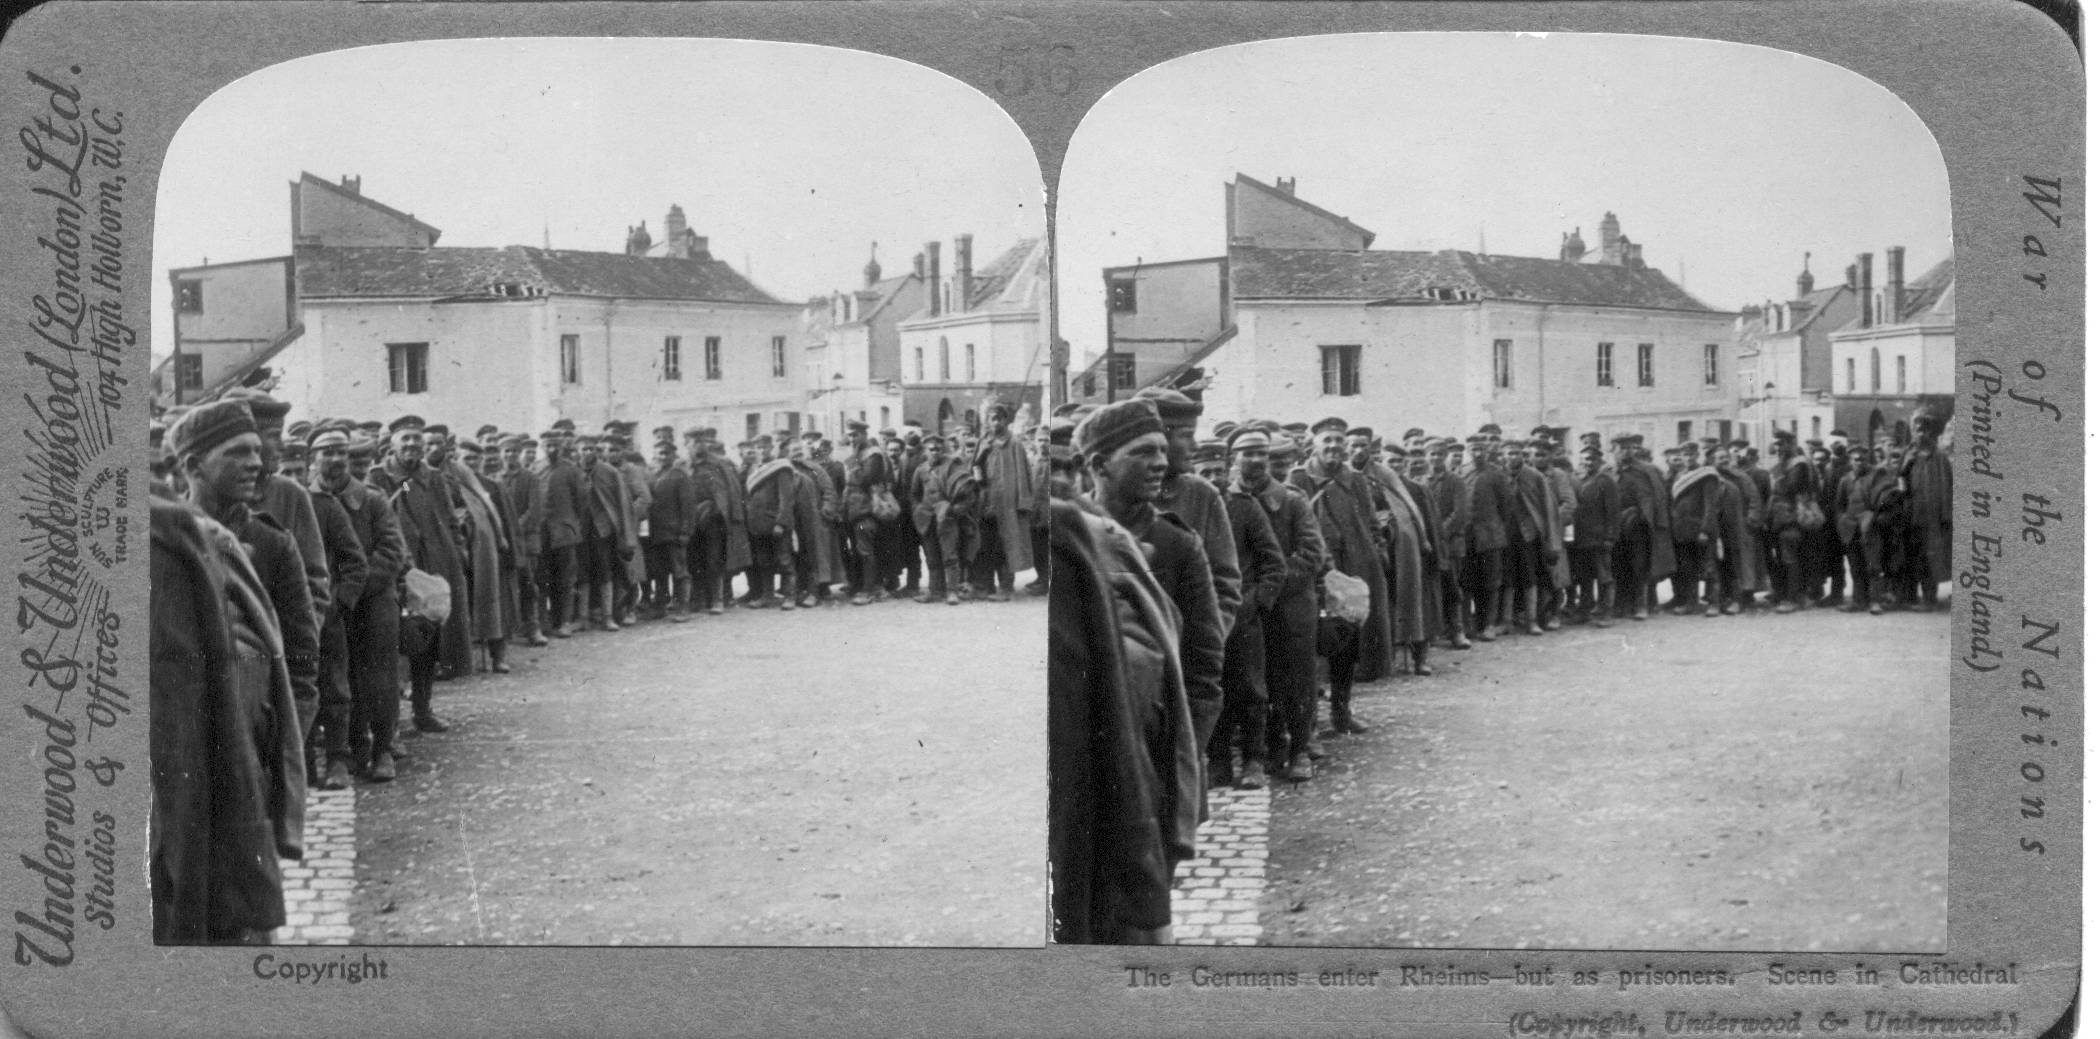 The Germans enter Rheims--but as prisoners. Scene in Cathedral Square, 1917